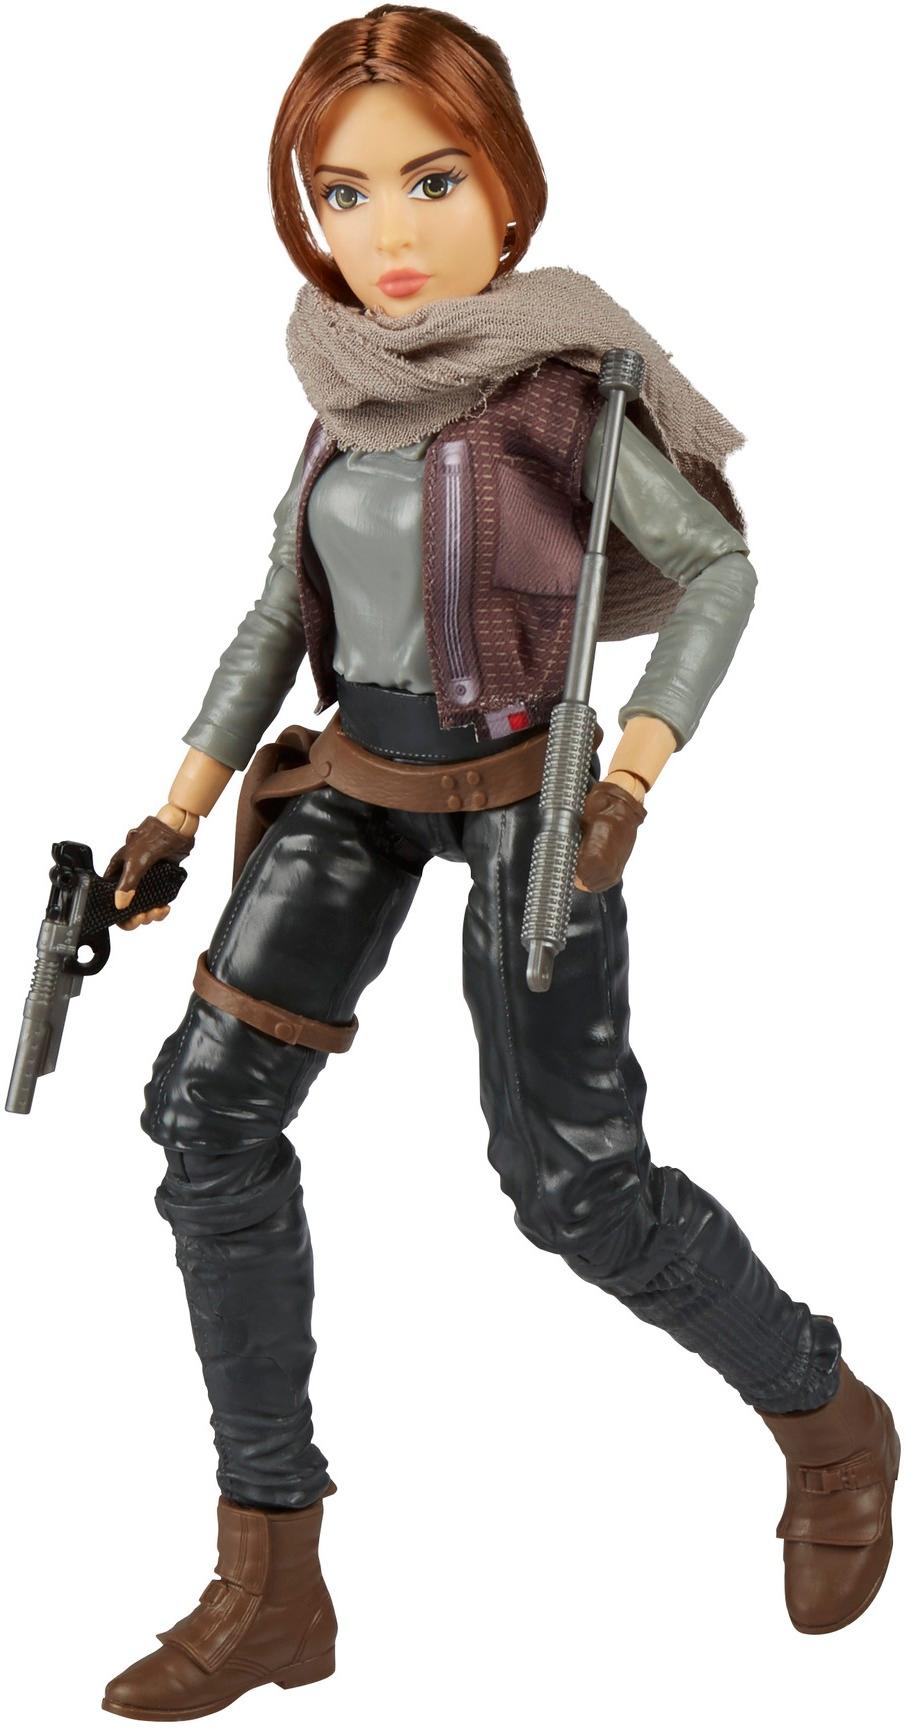 Star Wars Forces of Destiny Jyn Erso Adventure Figure Details about   Hasbro 